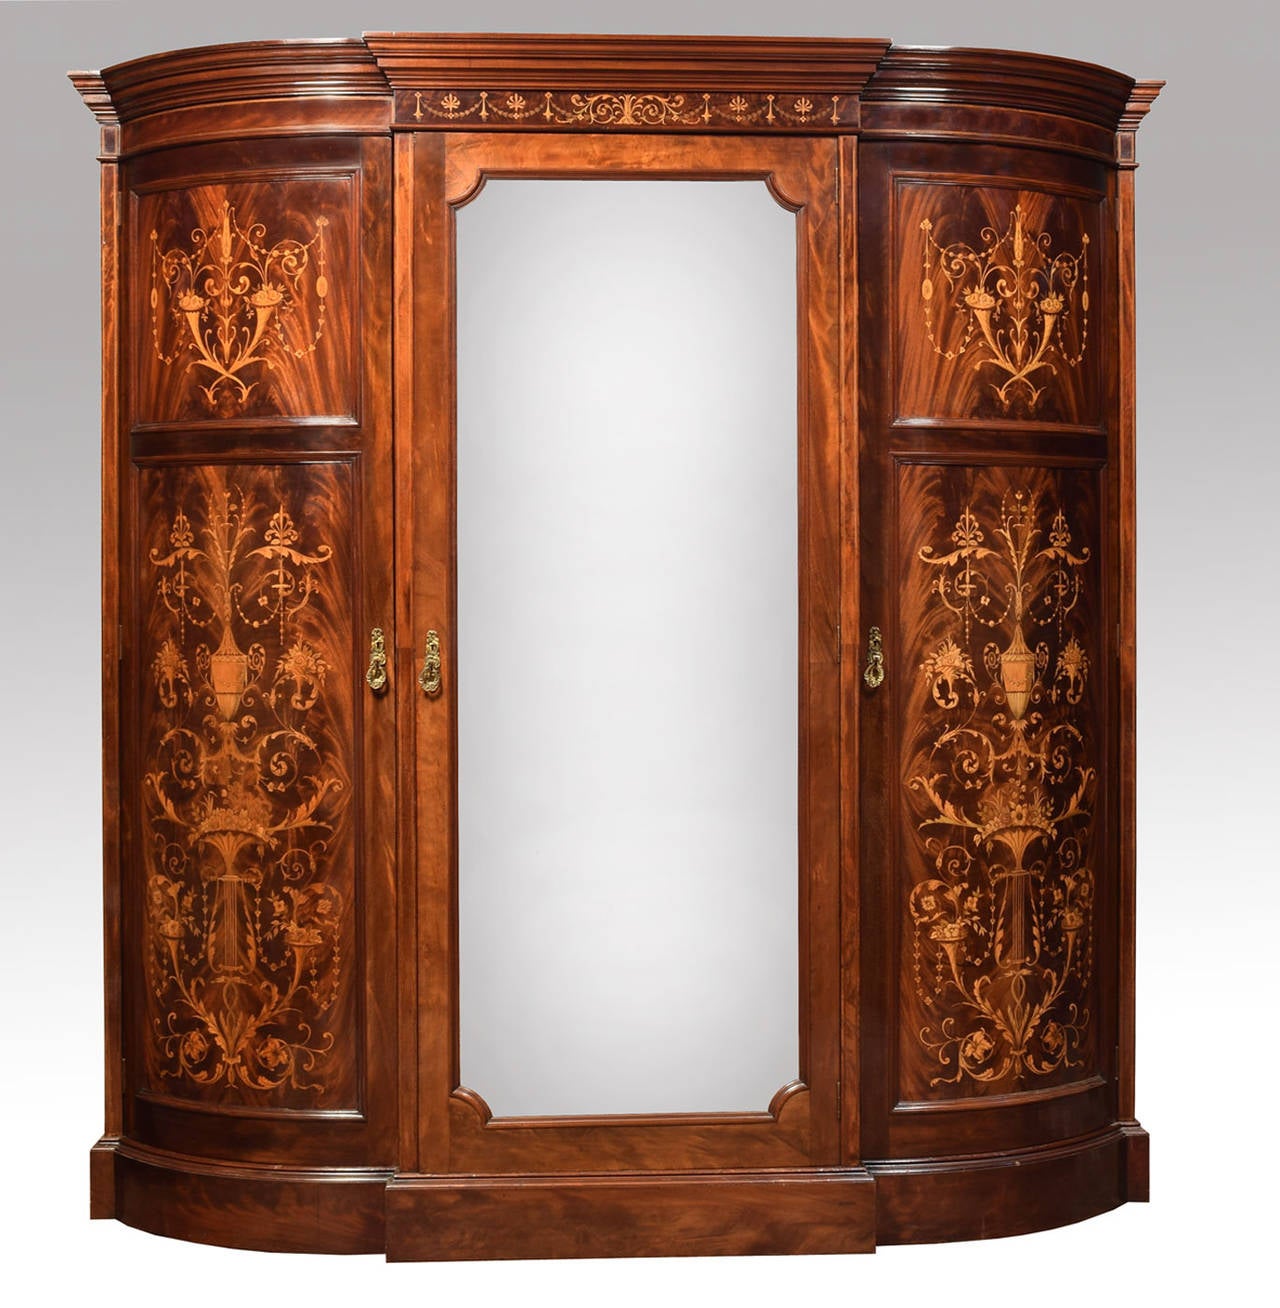 Early 20th century mahogany and marquetry triple wardrobe retailed by Maple & Co. Ltd London and Paris, having moulded cornice above the central bevelled mirror door opening to reveal and arrangement of sliding trays and short drawers flanked by a